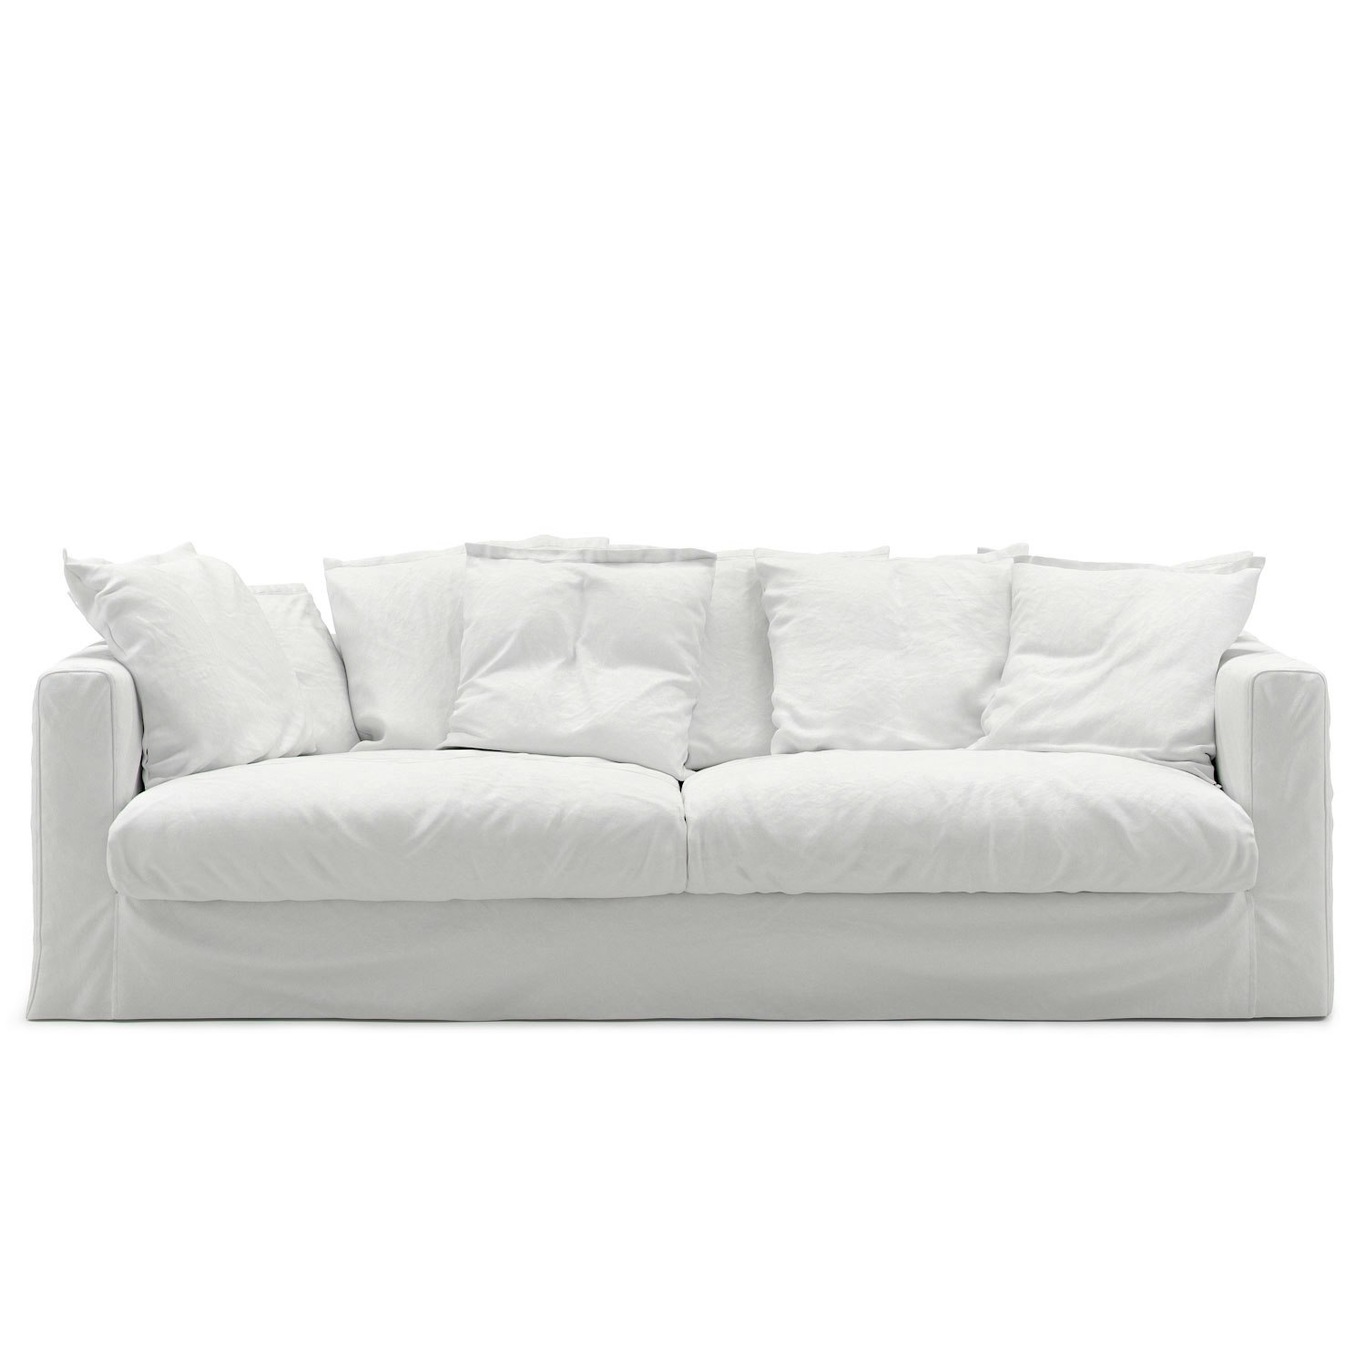 Le Grand Air Upholstery 3-Seater Cotton, White